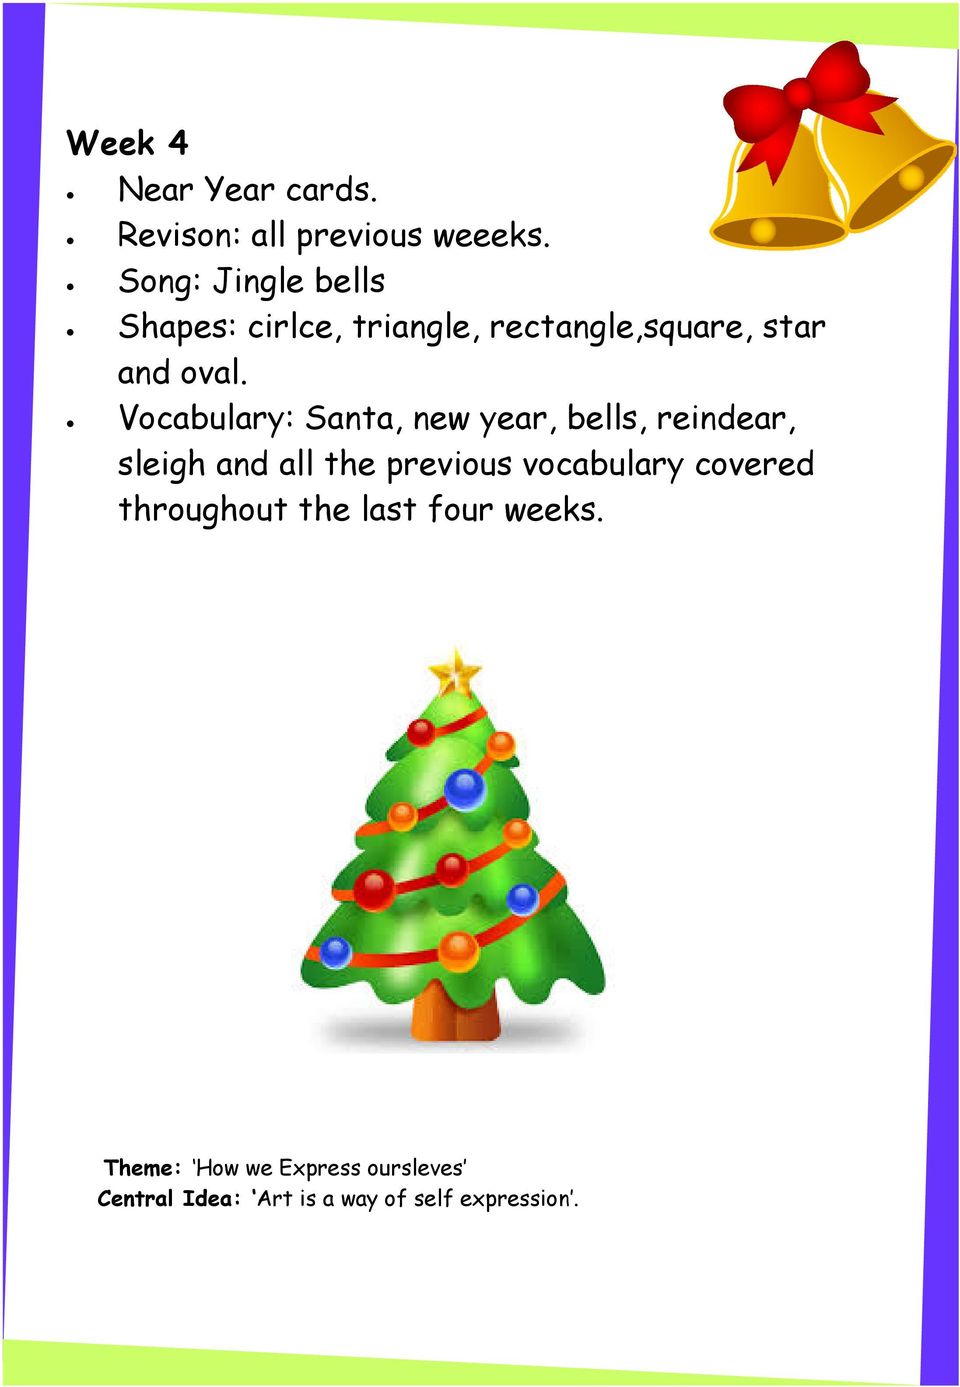 Vocabulary: Santa, new year, bells, reindear, sleigh and all the previous